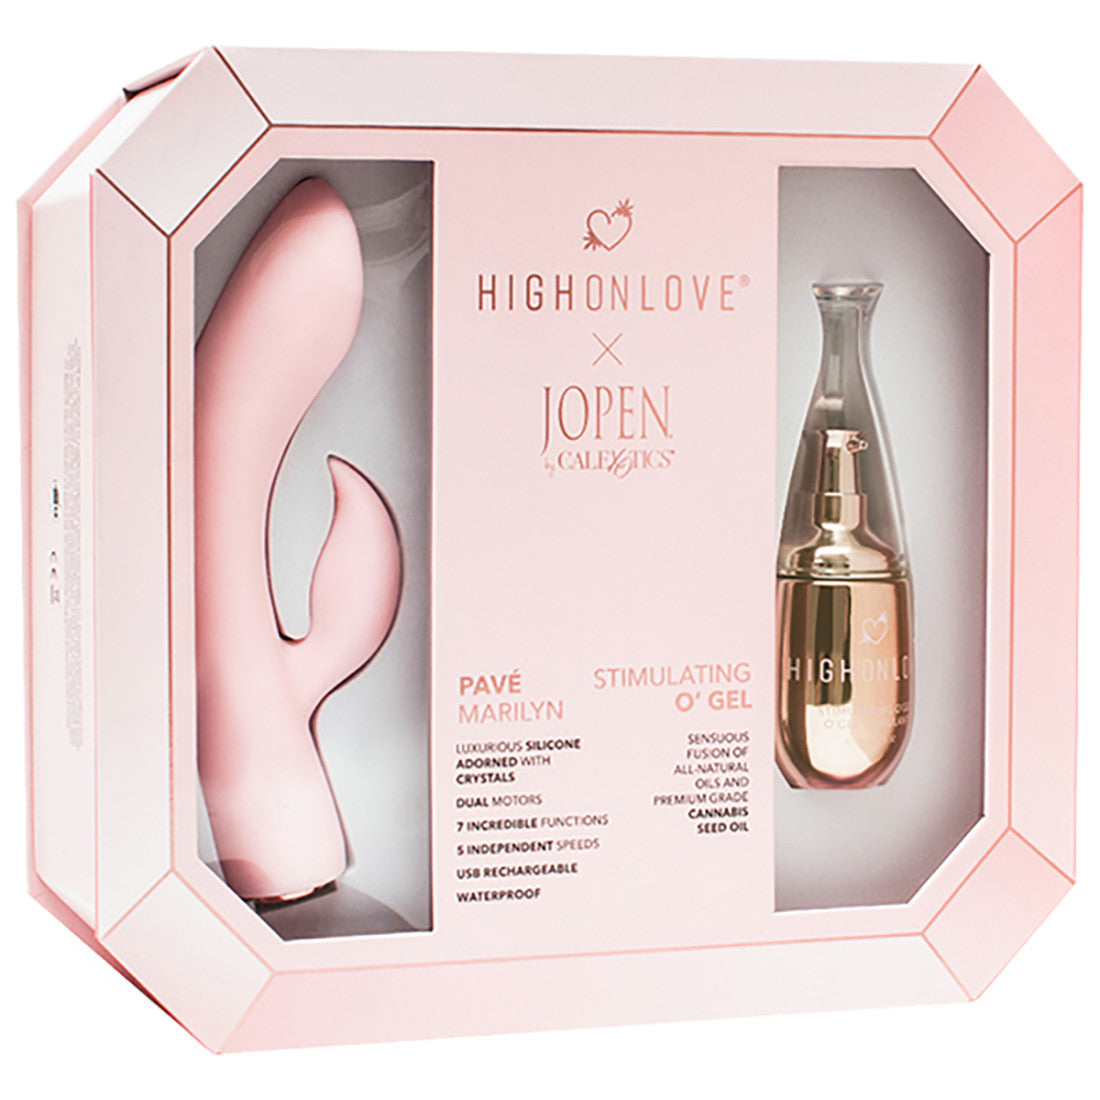 HighOnLove Objects of Pleasure Gift Set